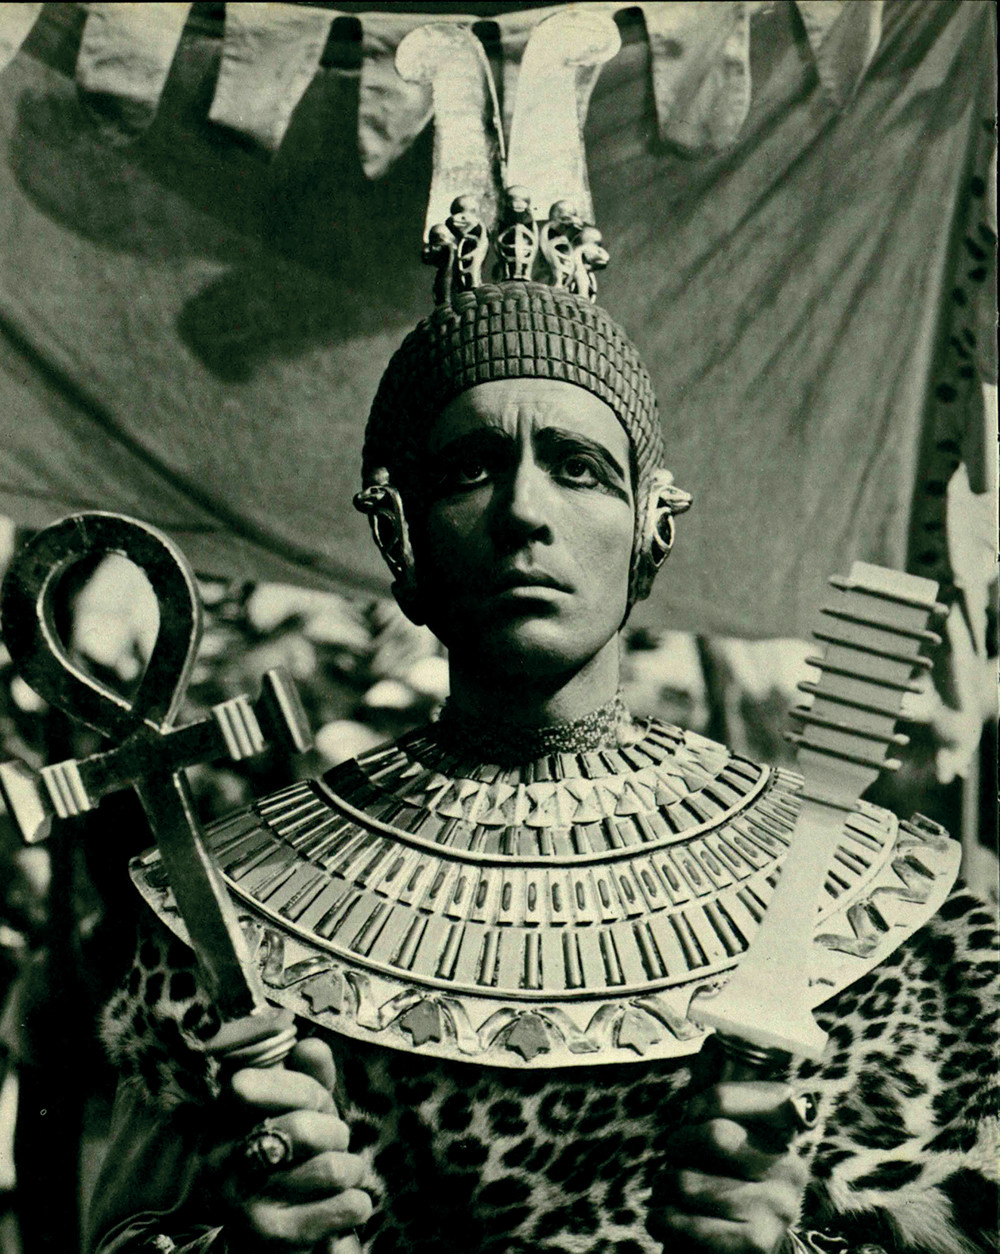 Christopher Lee as High Priest Kharis before his mummification, The Mummy, 1959